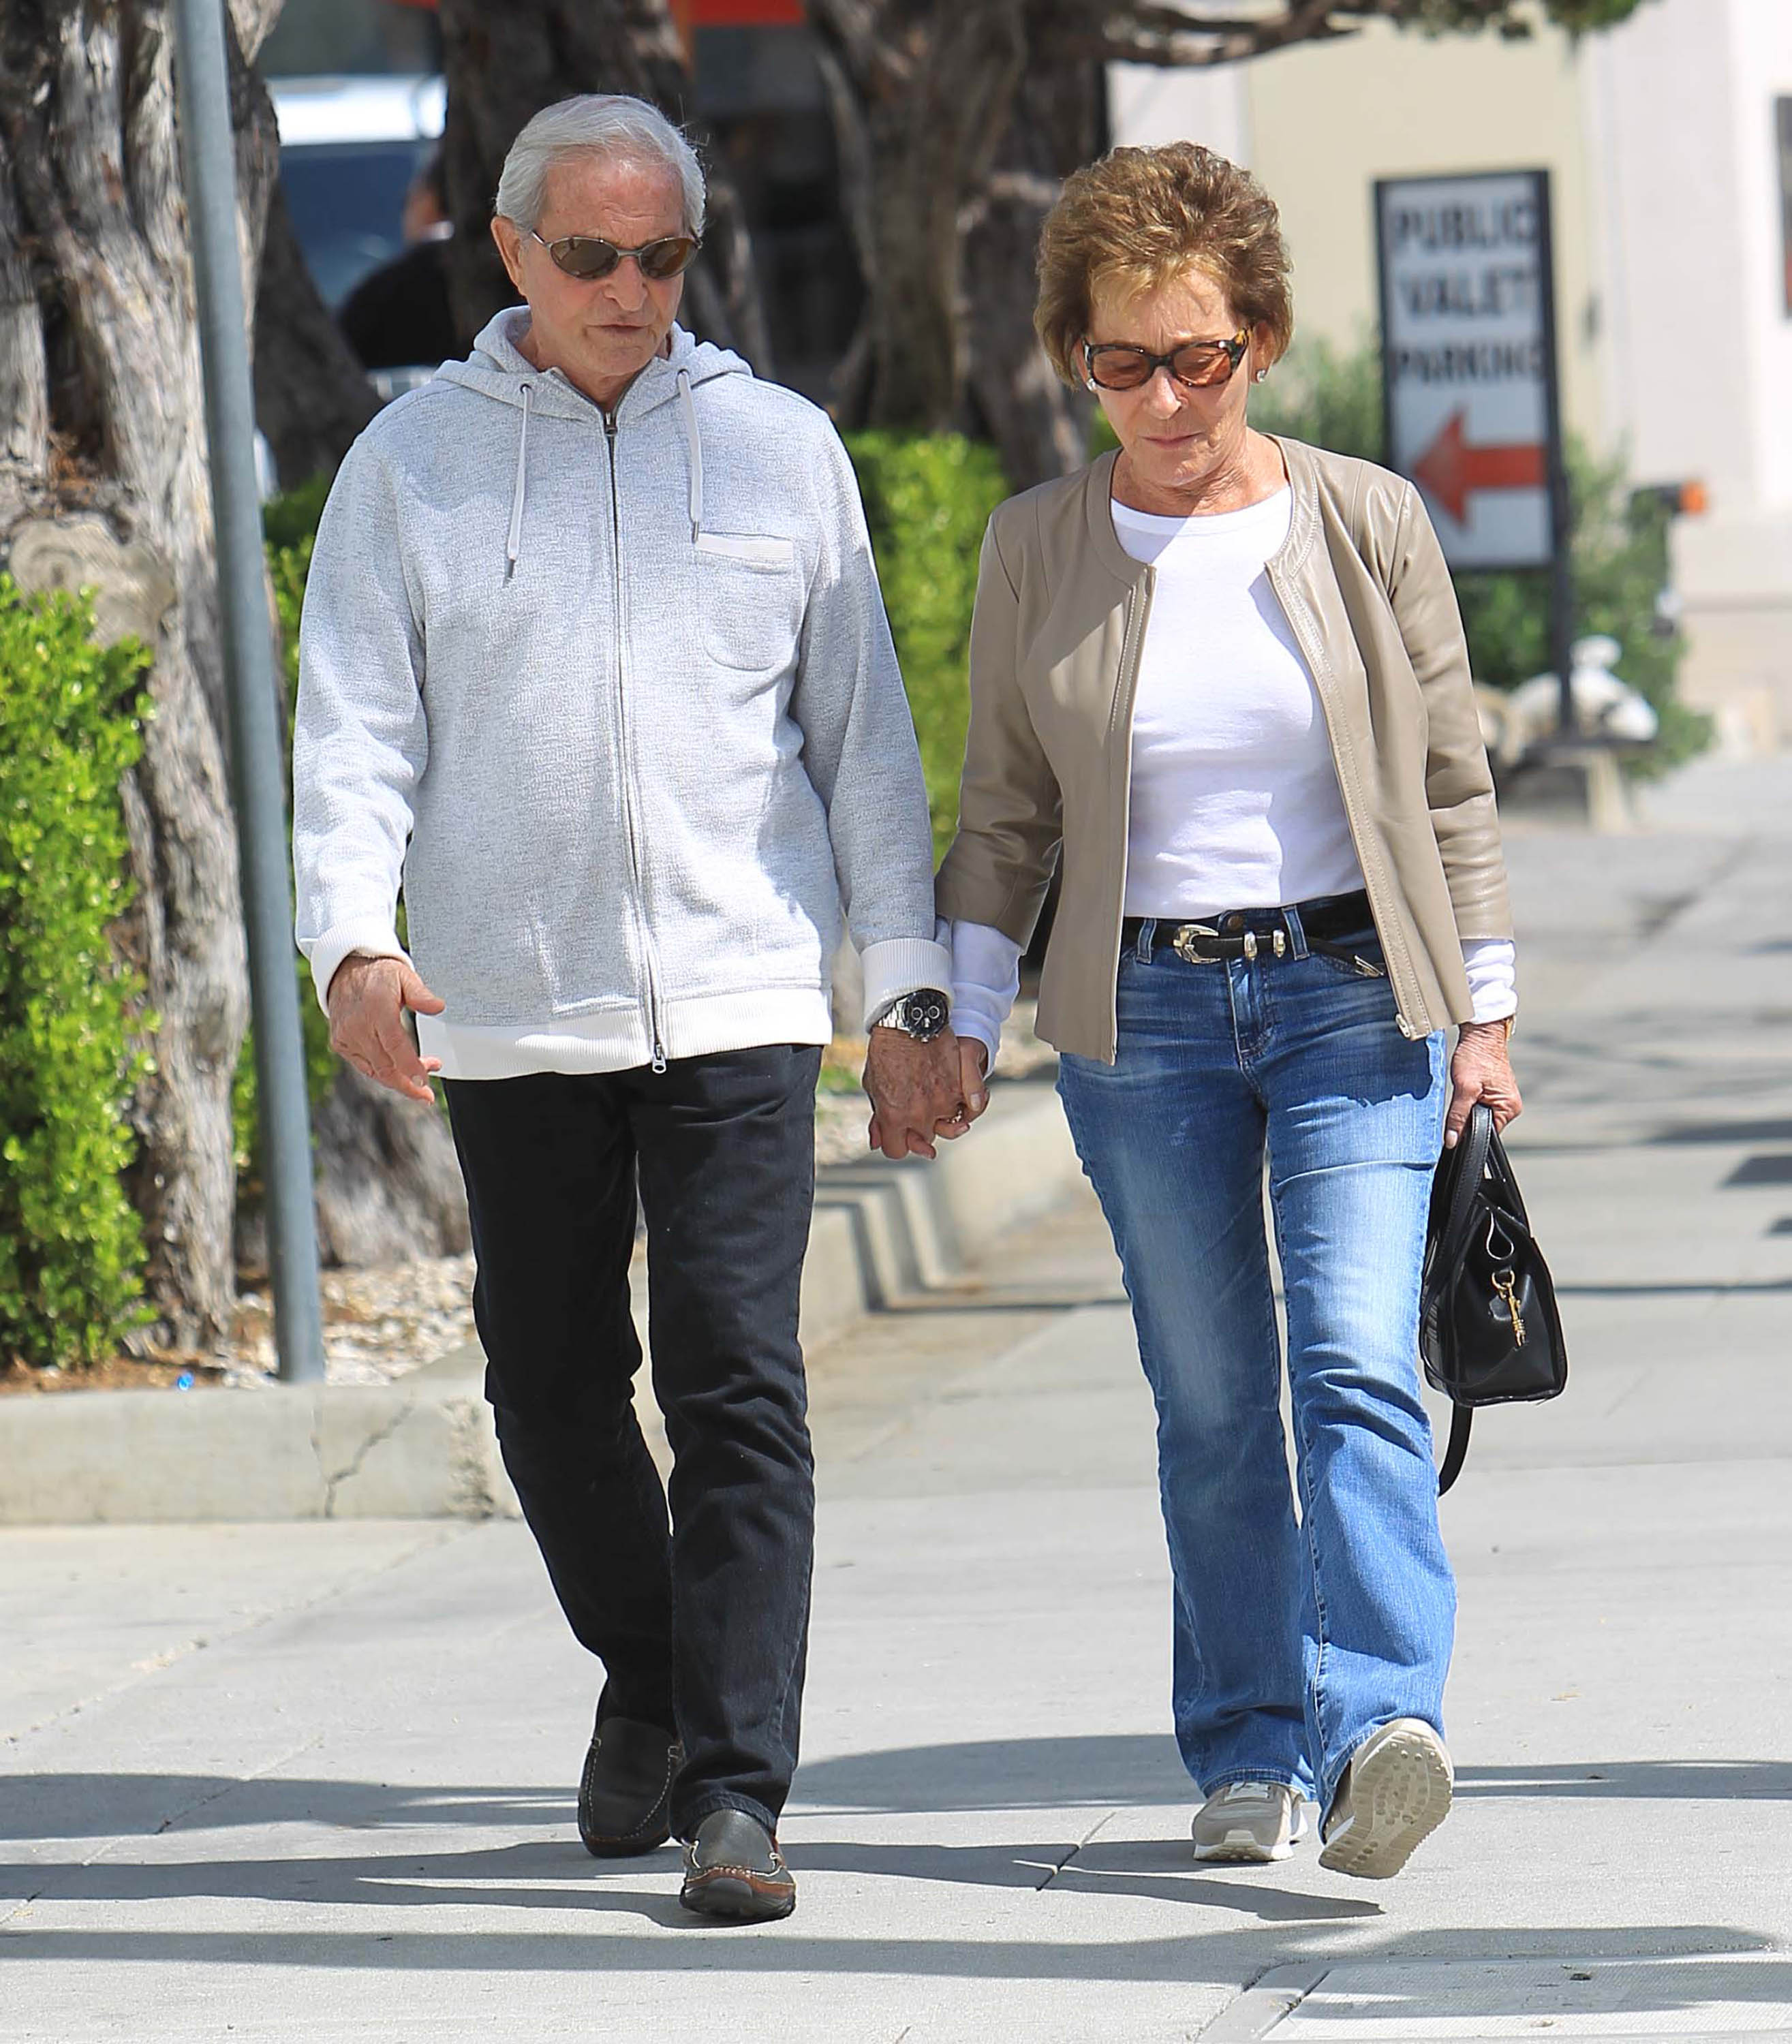 Judge Judy and her husband Jerry Sheindlin walking in Los Angeles in 2018 | Source: Getty Images